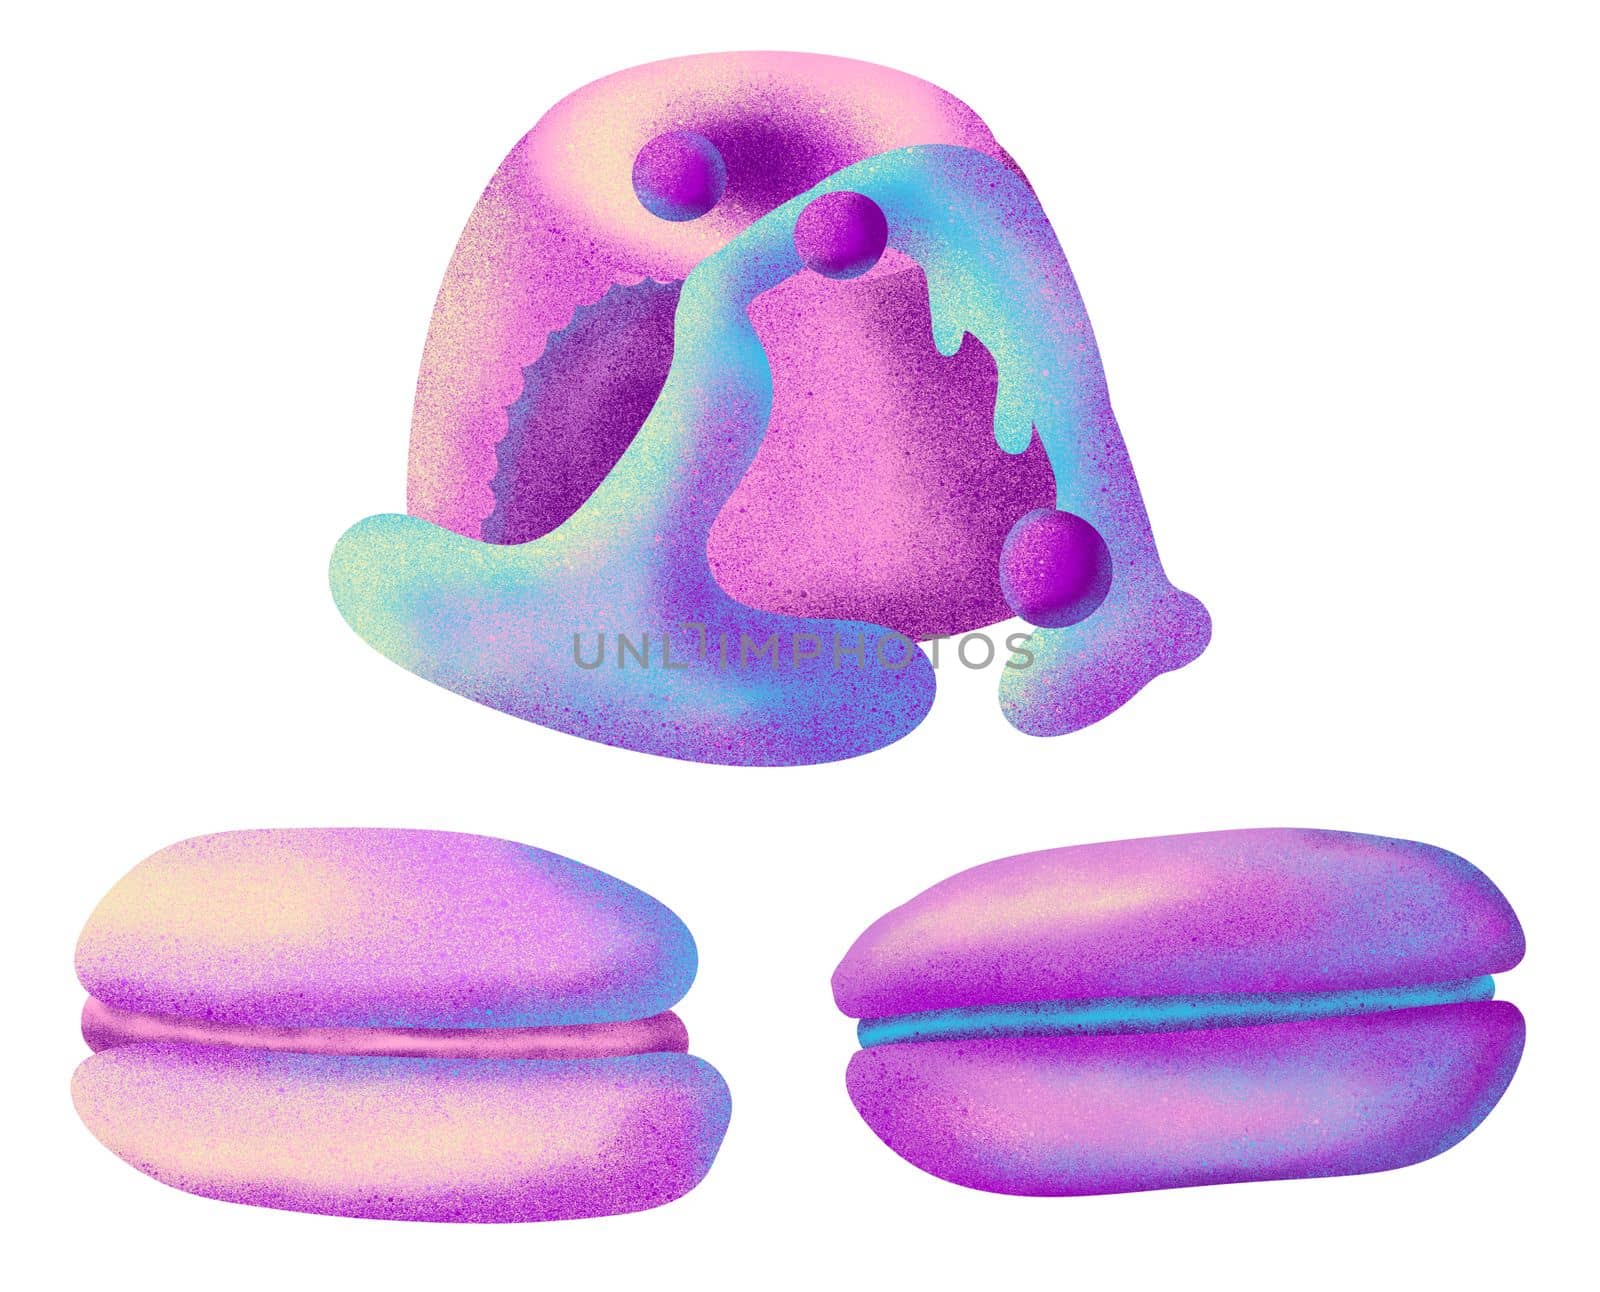 Hand drawn illustration of pastel sweet dessert pastry candy macaroon cupcake. Purple pink holographic dreamy tasty party food, bright trendy baking bakery recipe design